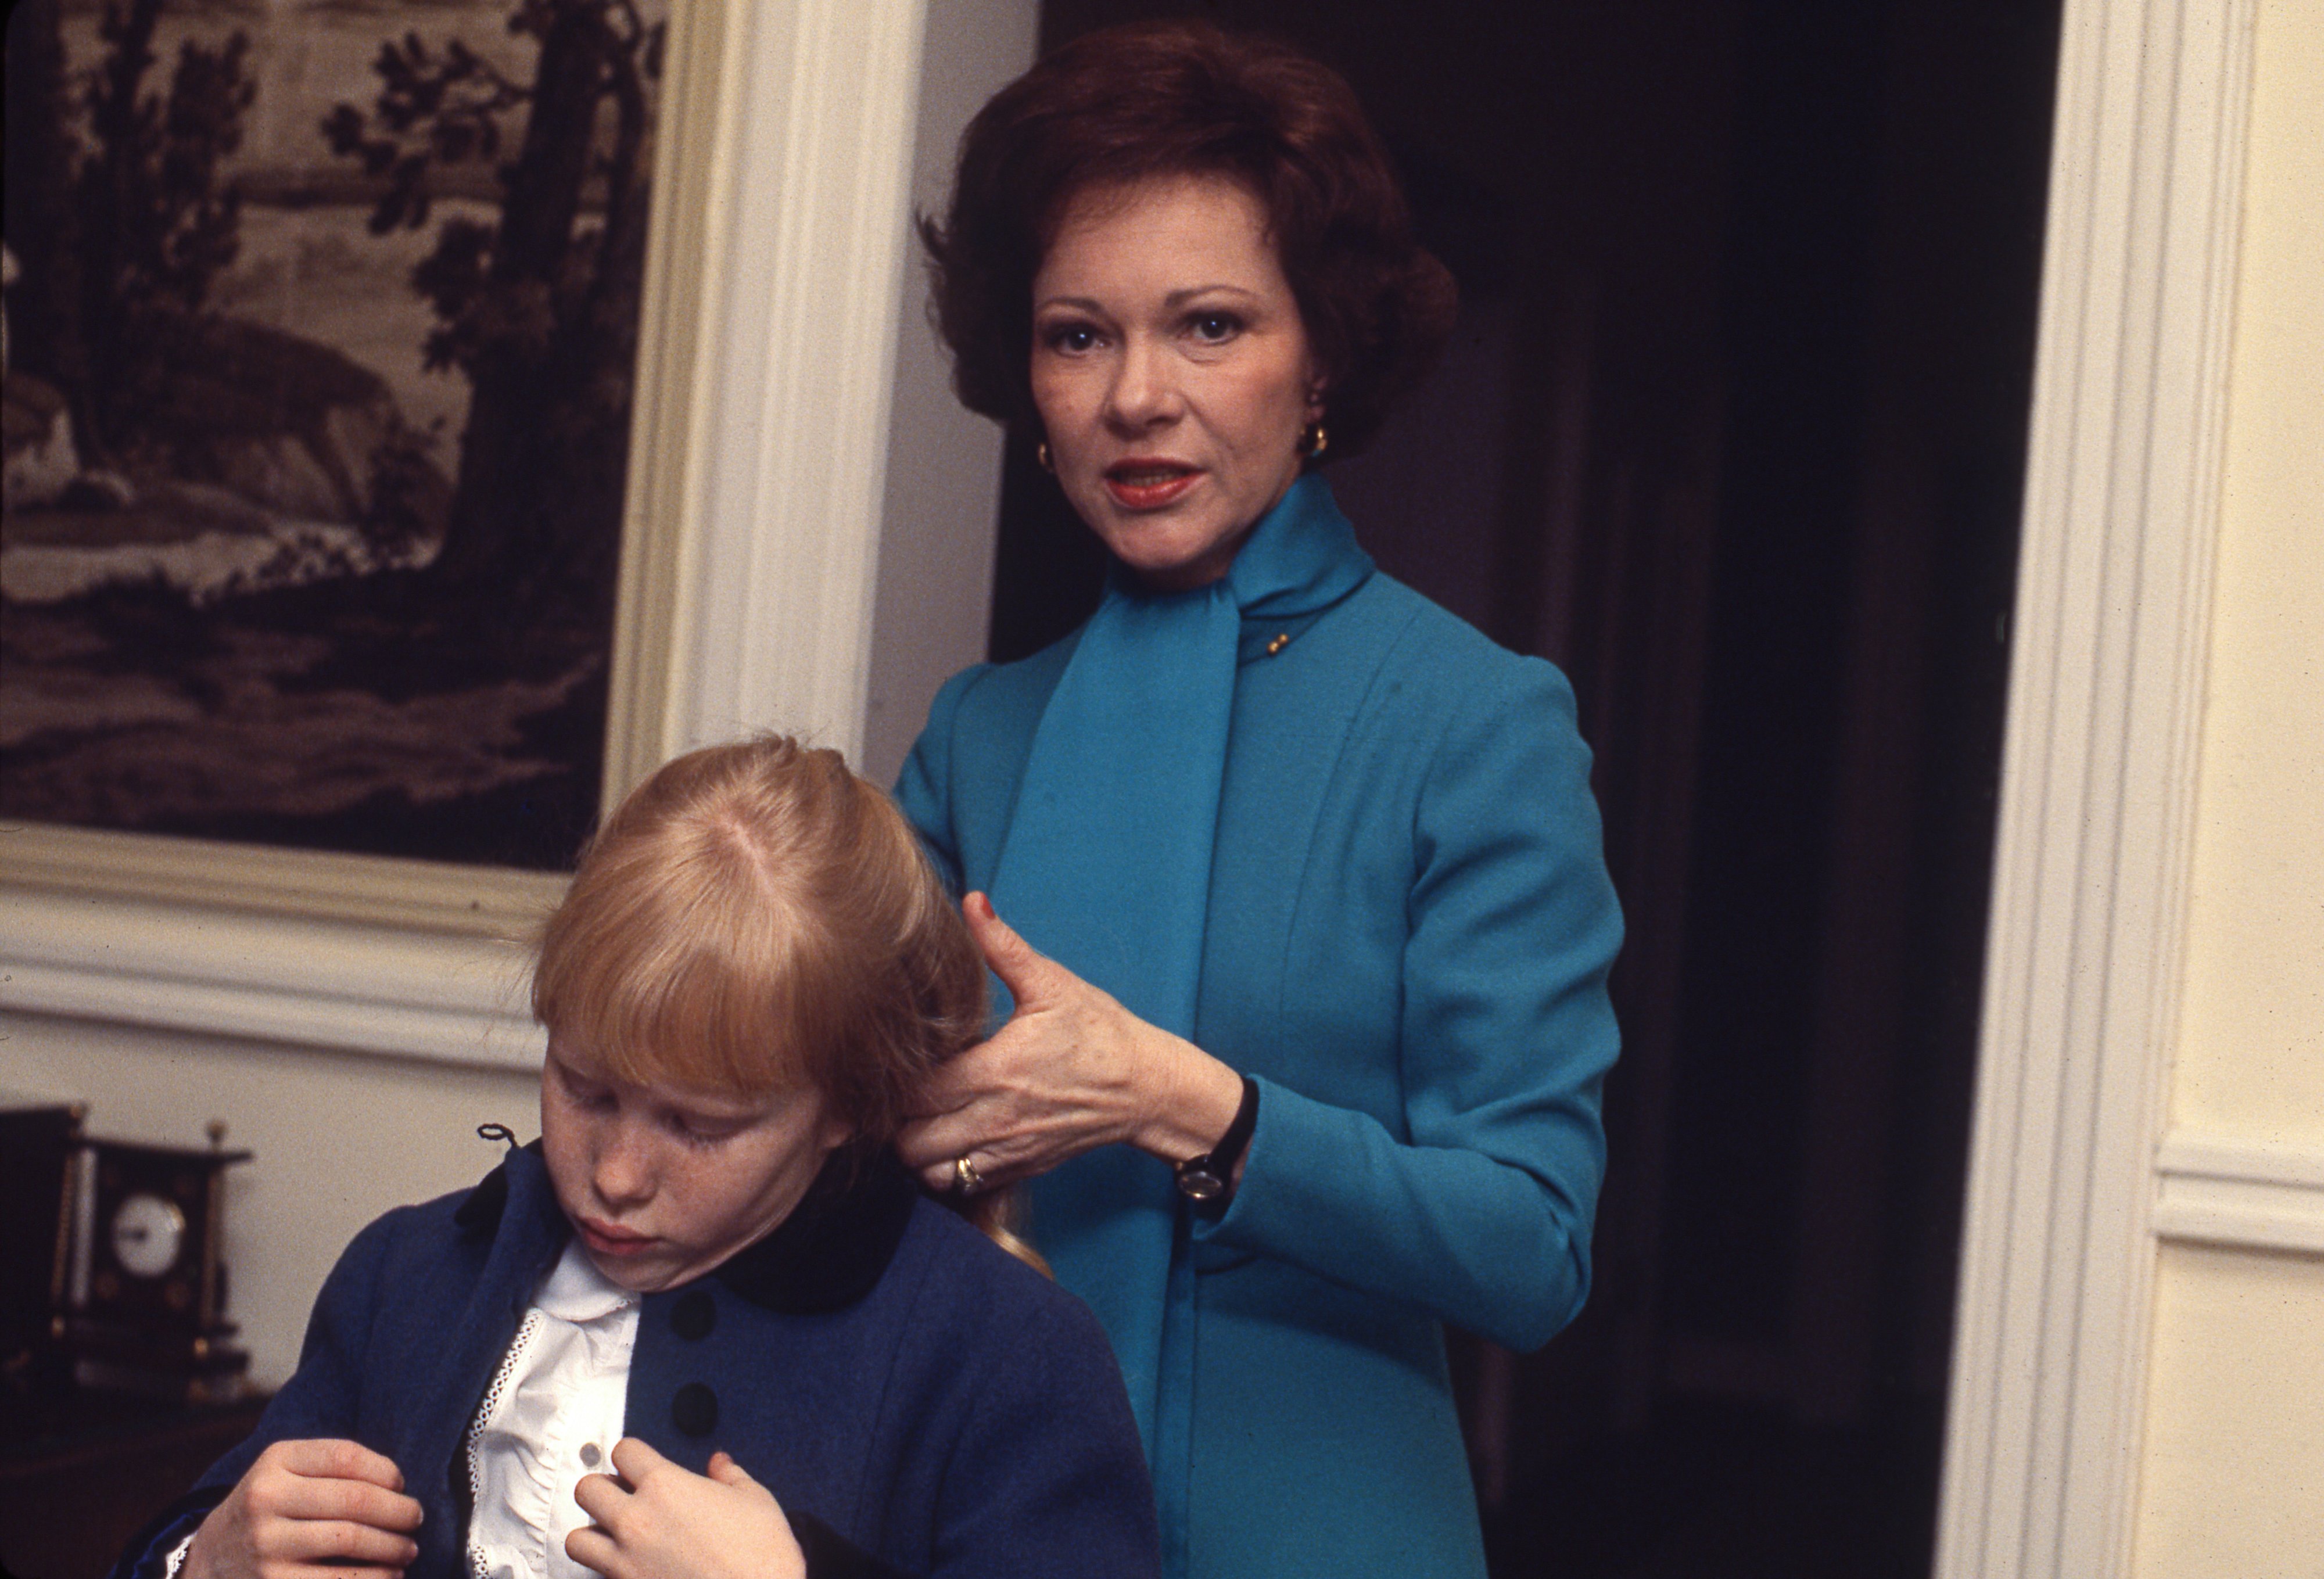 First Lady Rosalynn Carter pictured helping her daughter Amy prepare for President Jimmy Carter's Inaugural Parade on January 20, 1977 in Washington D.C. ┃Source: Getty Images